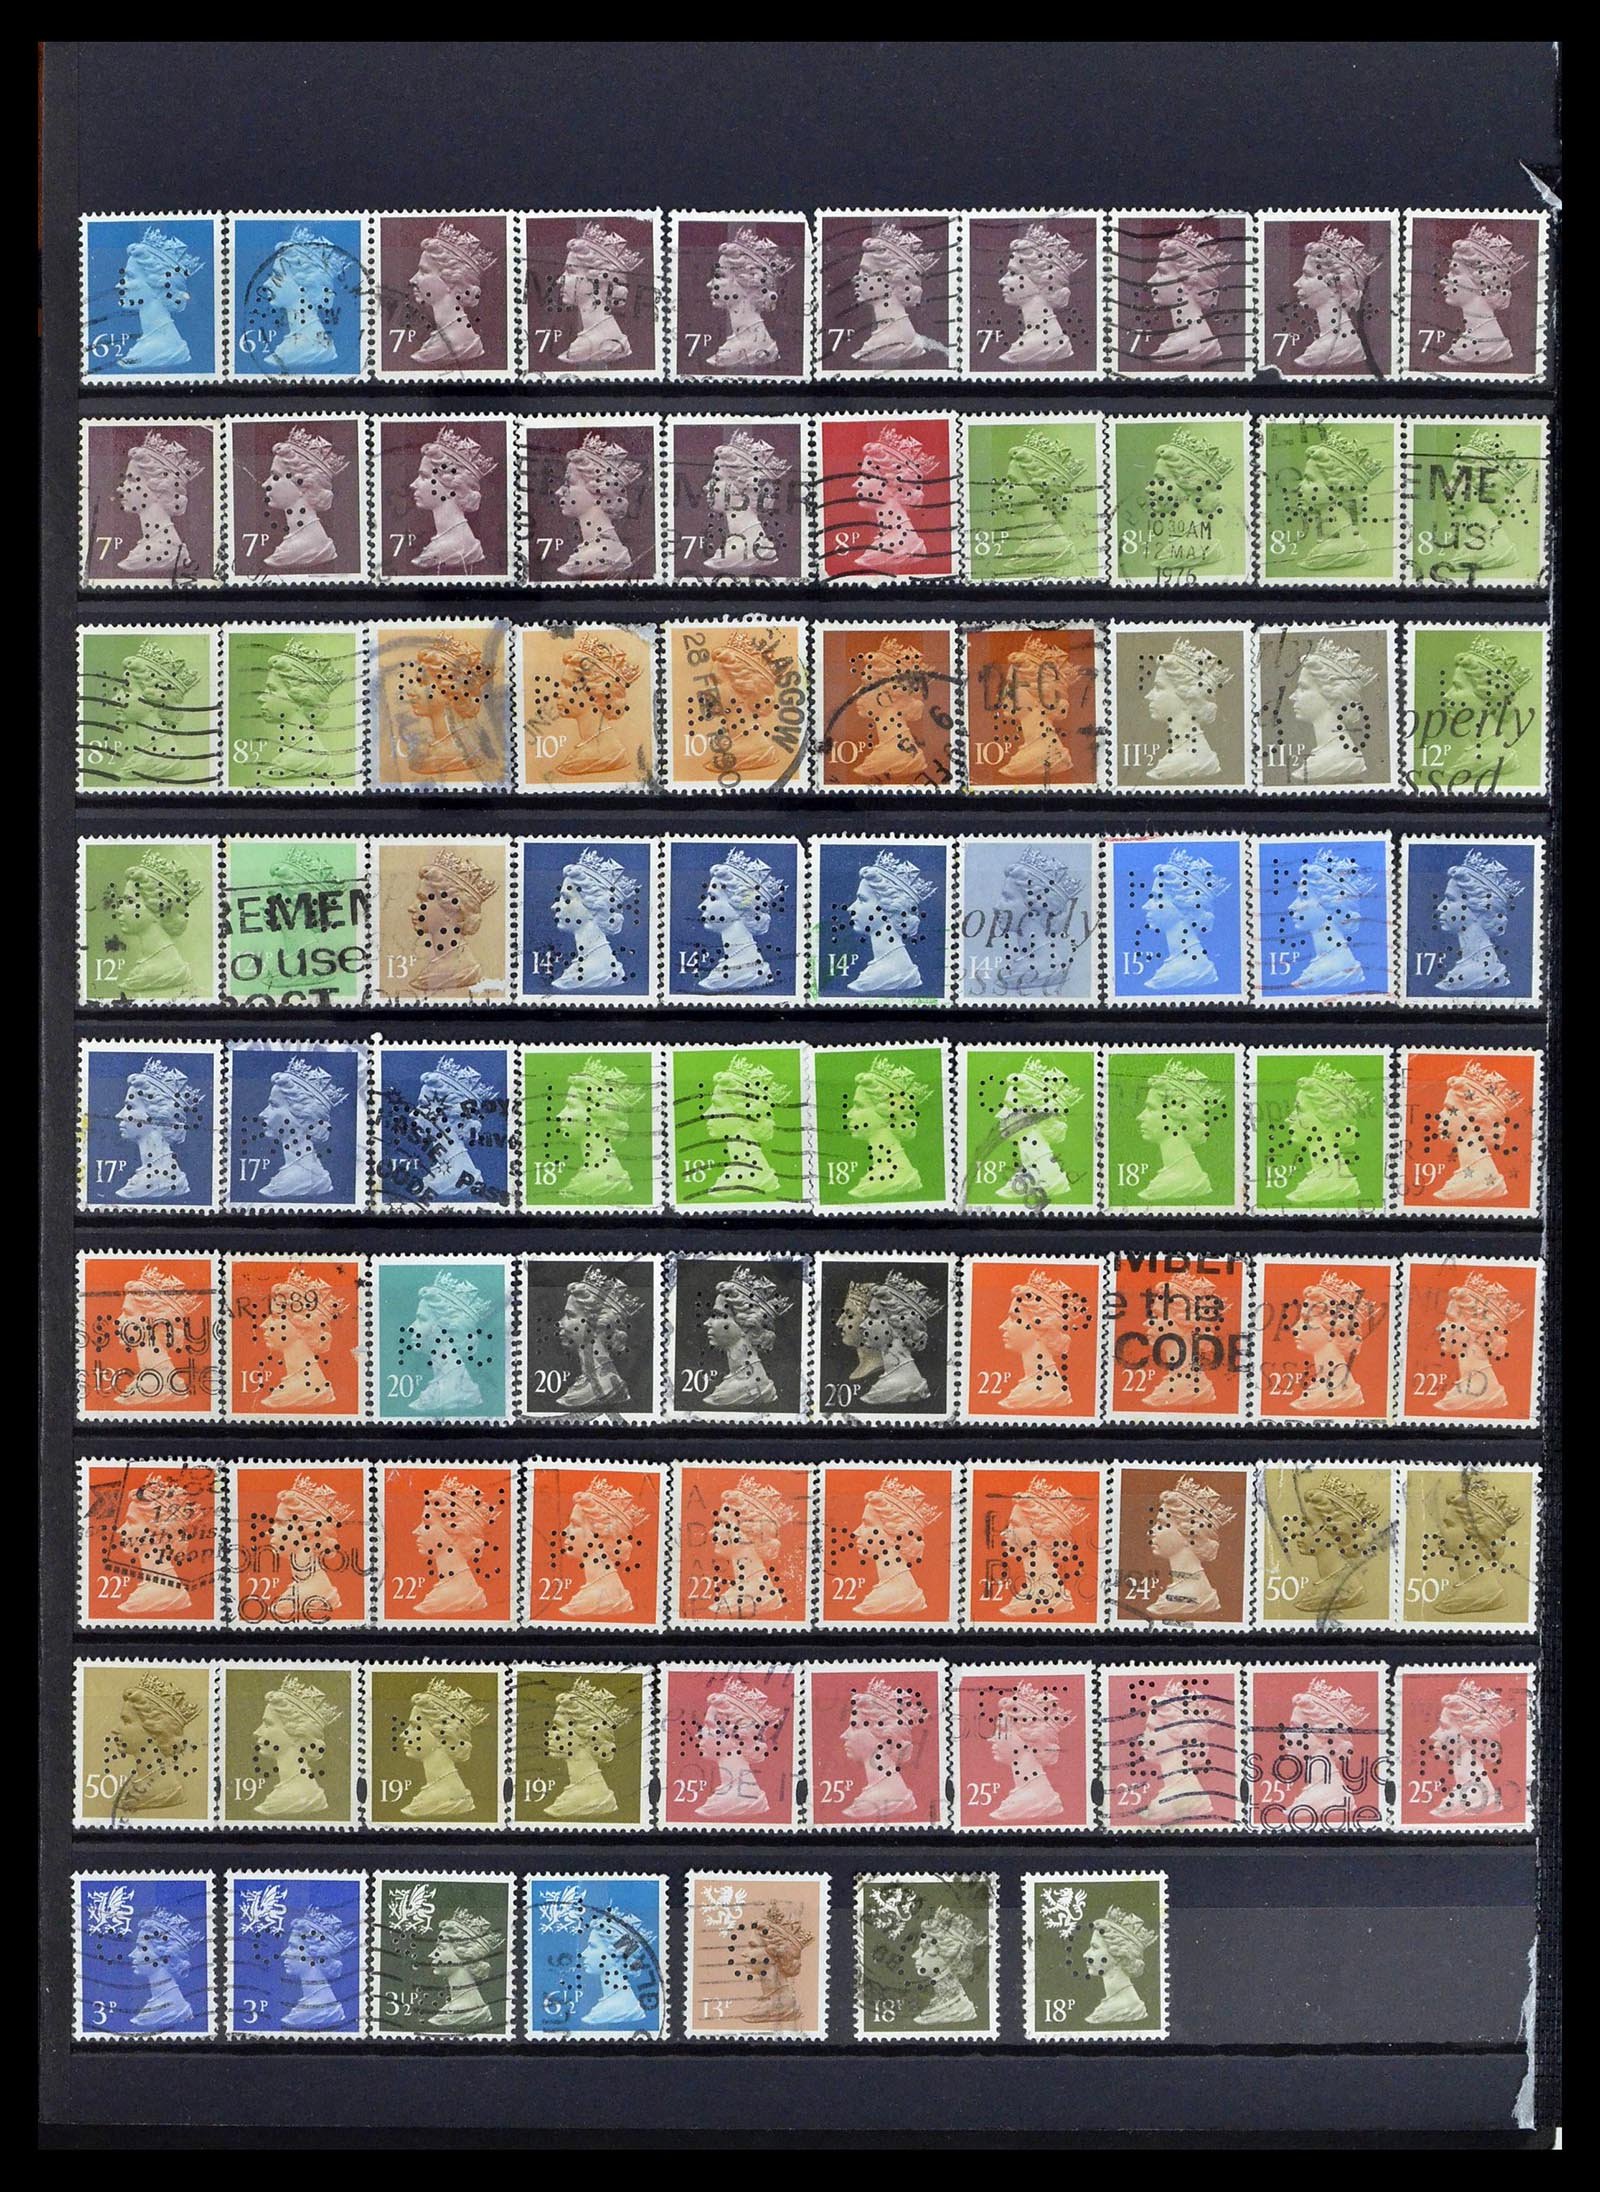 39196 0121 - Stamp collection 39196 Great Britain 1844-1955.